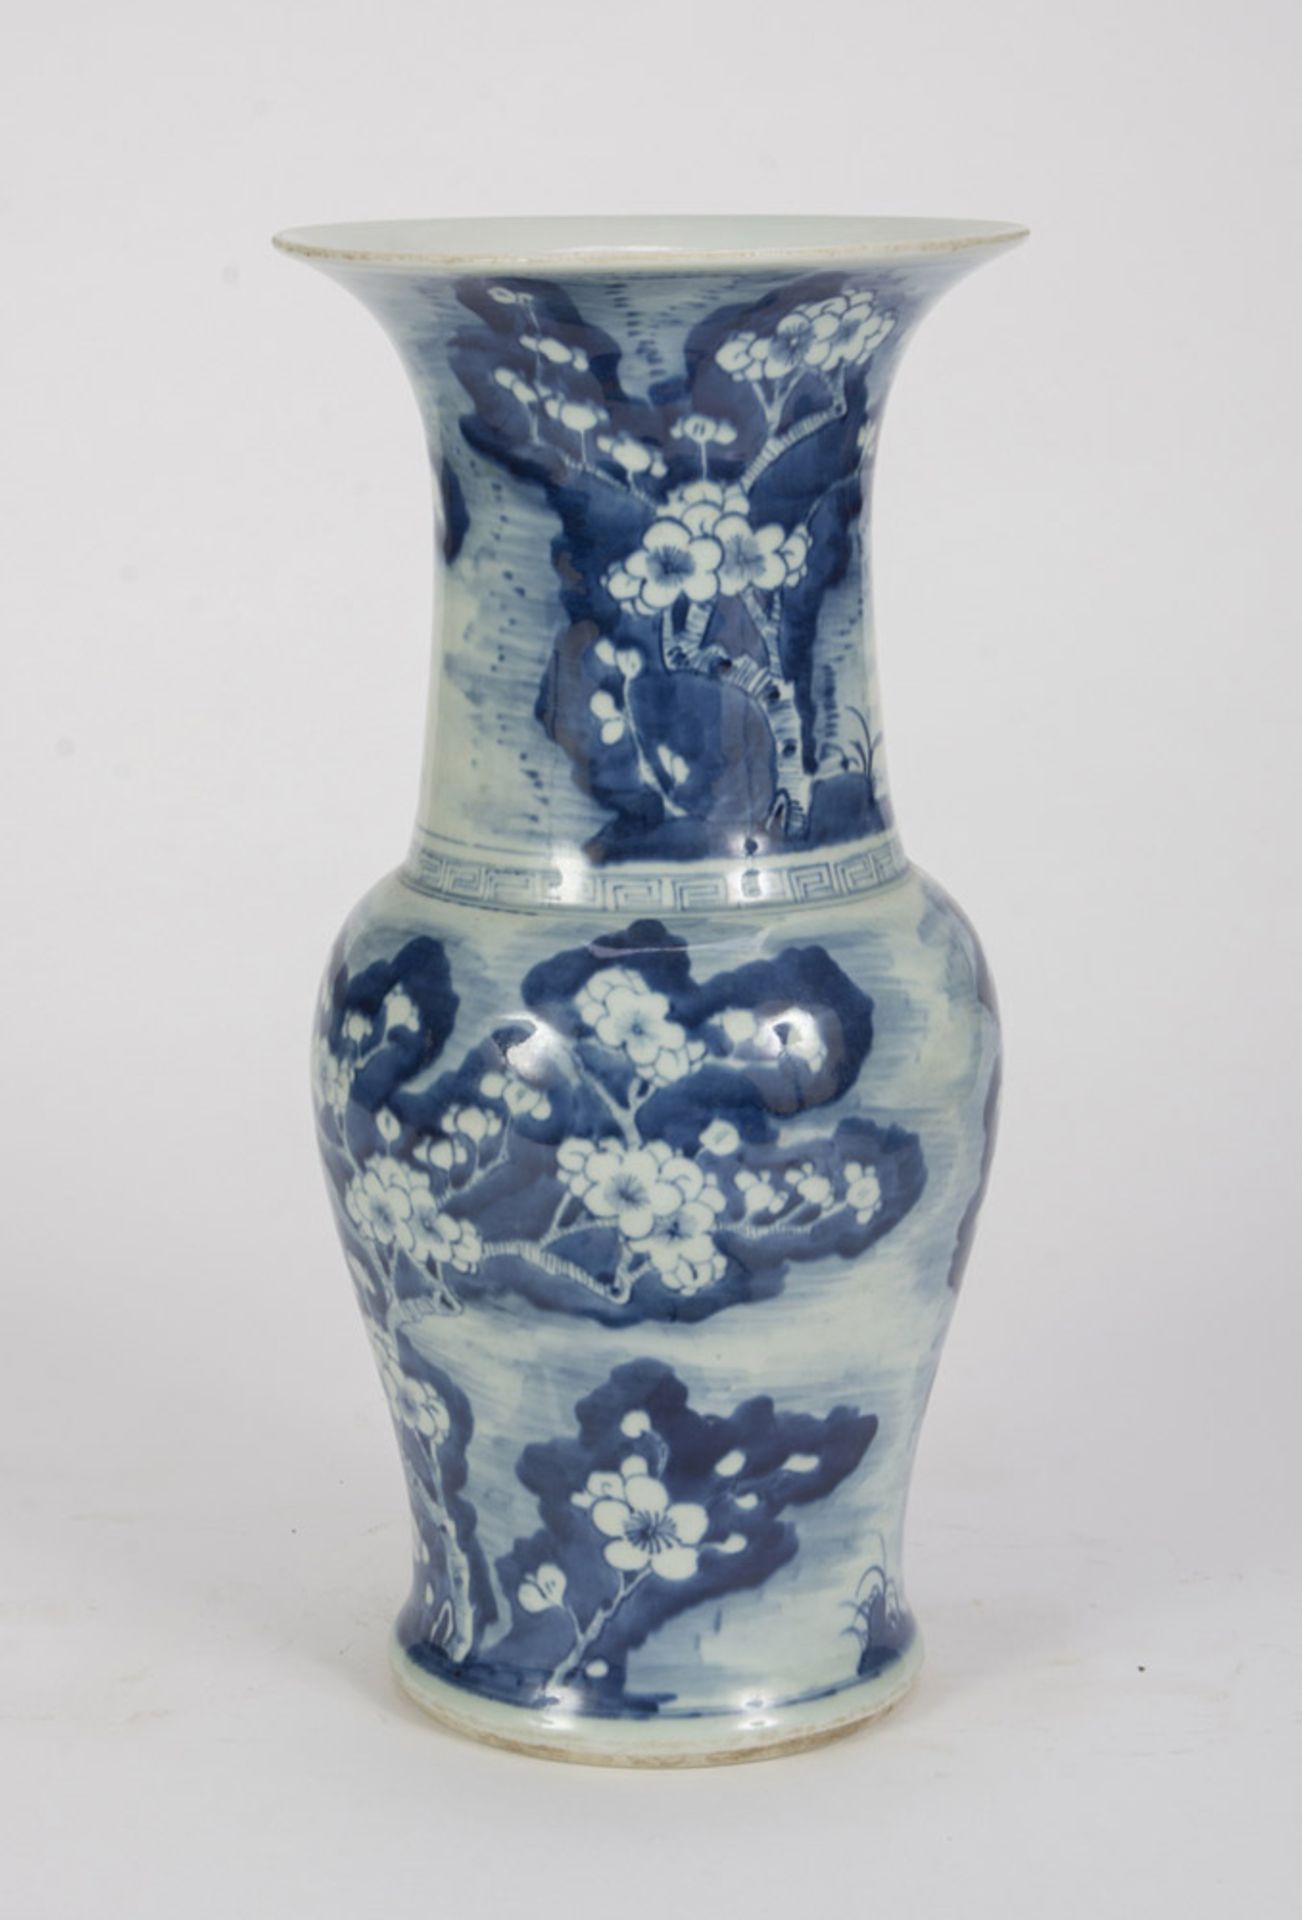 IN WHITE AND BLUE PORCELAIN VASE, CHINA 20TH CENTURY